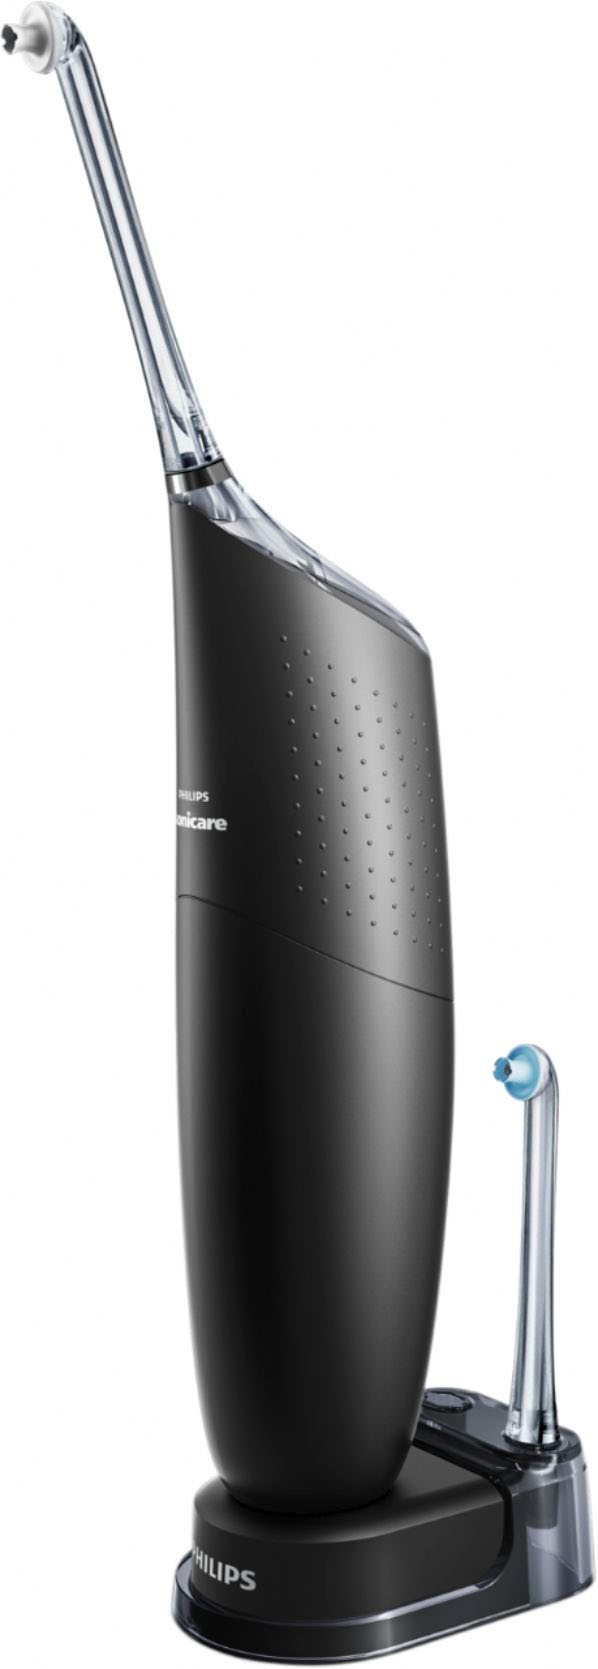 Angle View: Philips Sonicare - AirFloss Ultra - Interdental cleaner - Black